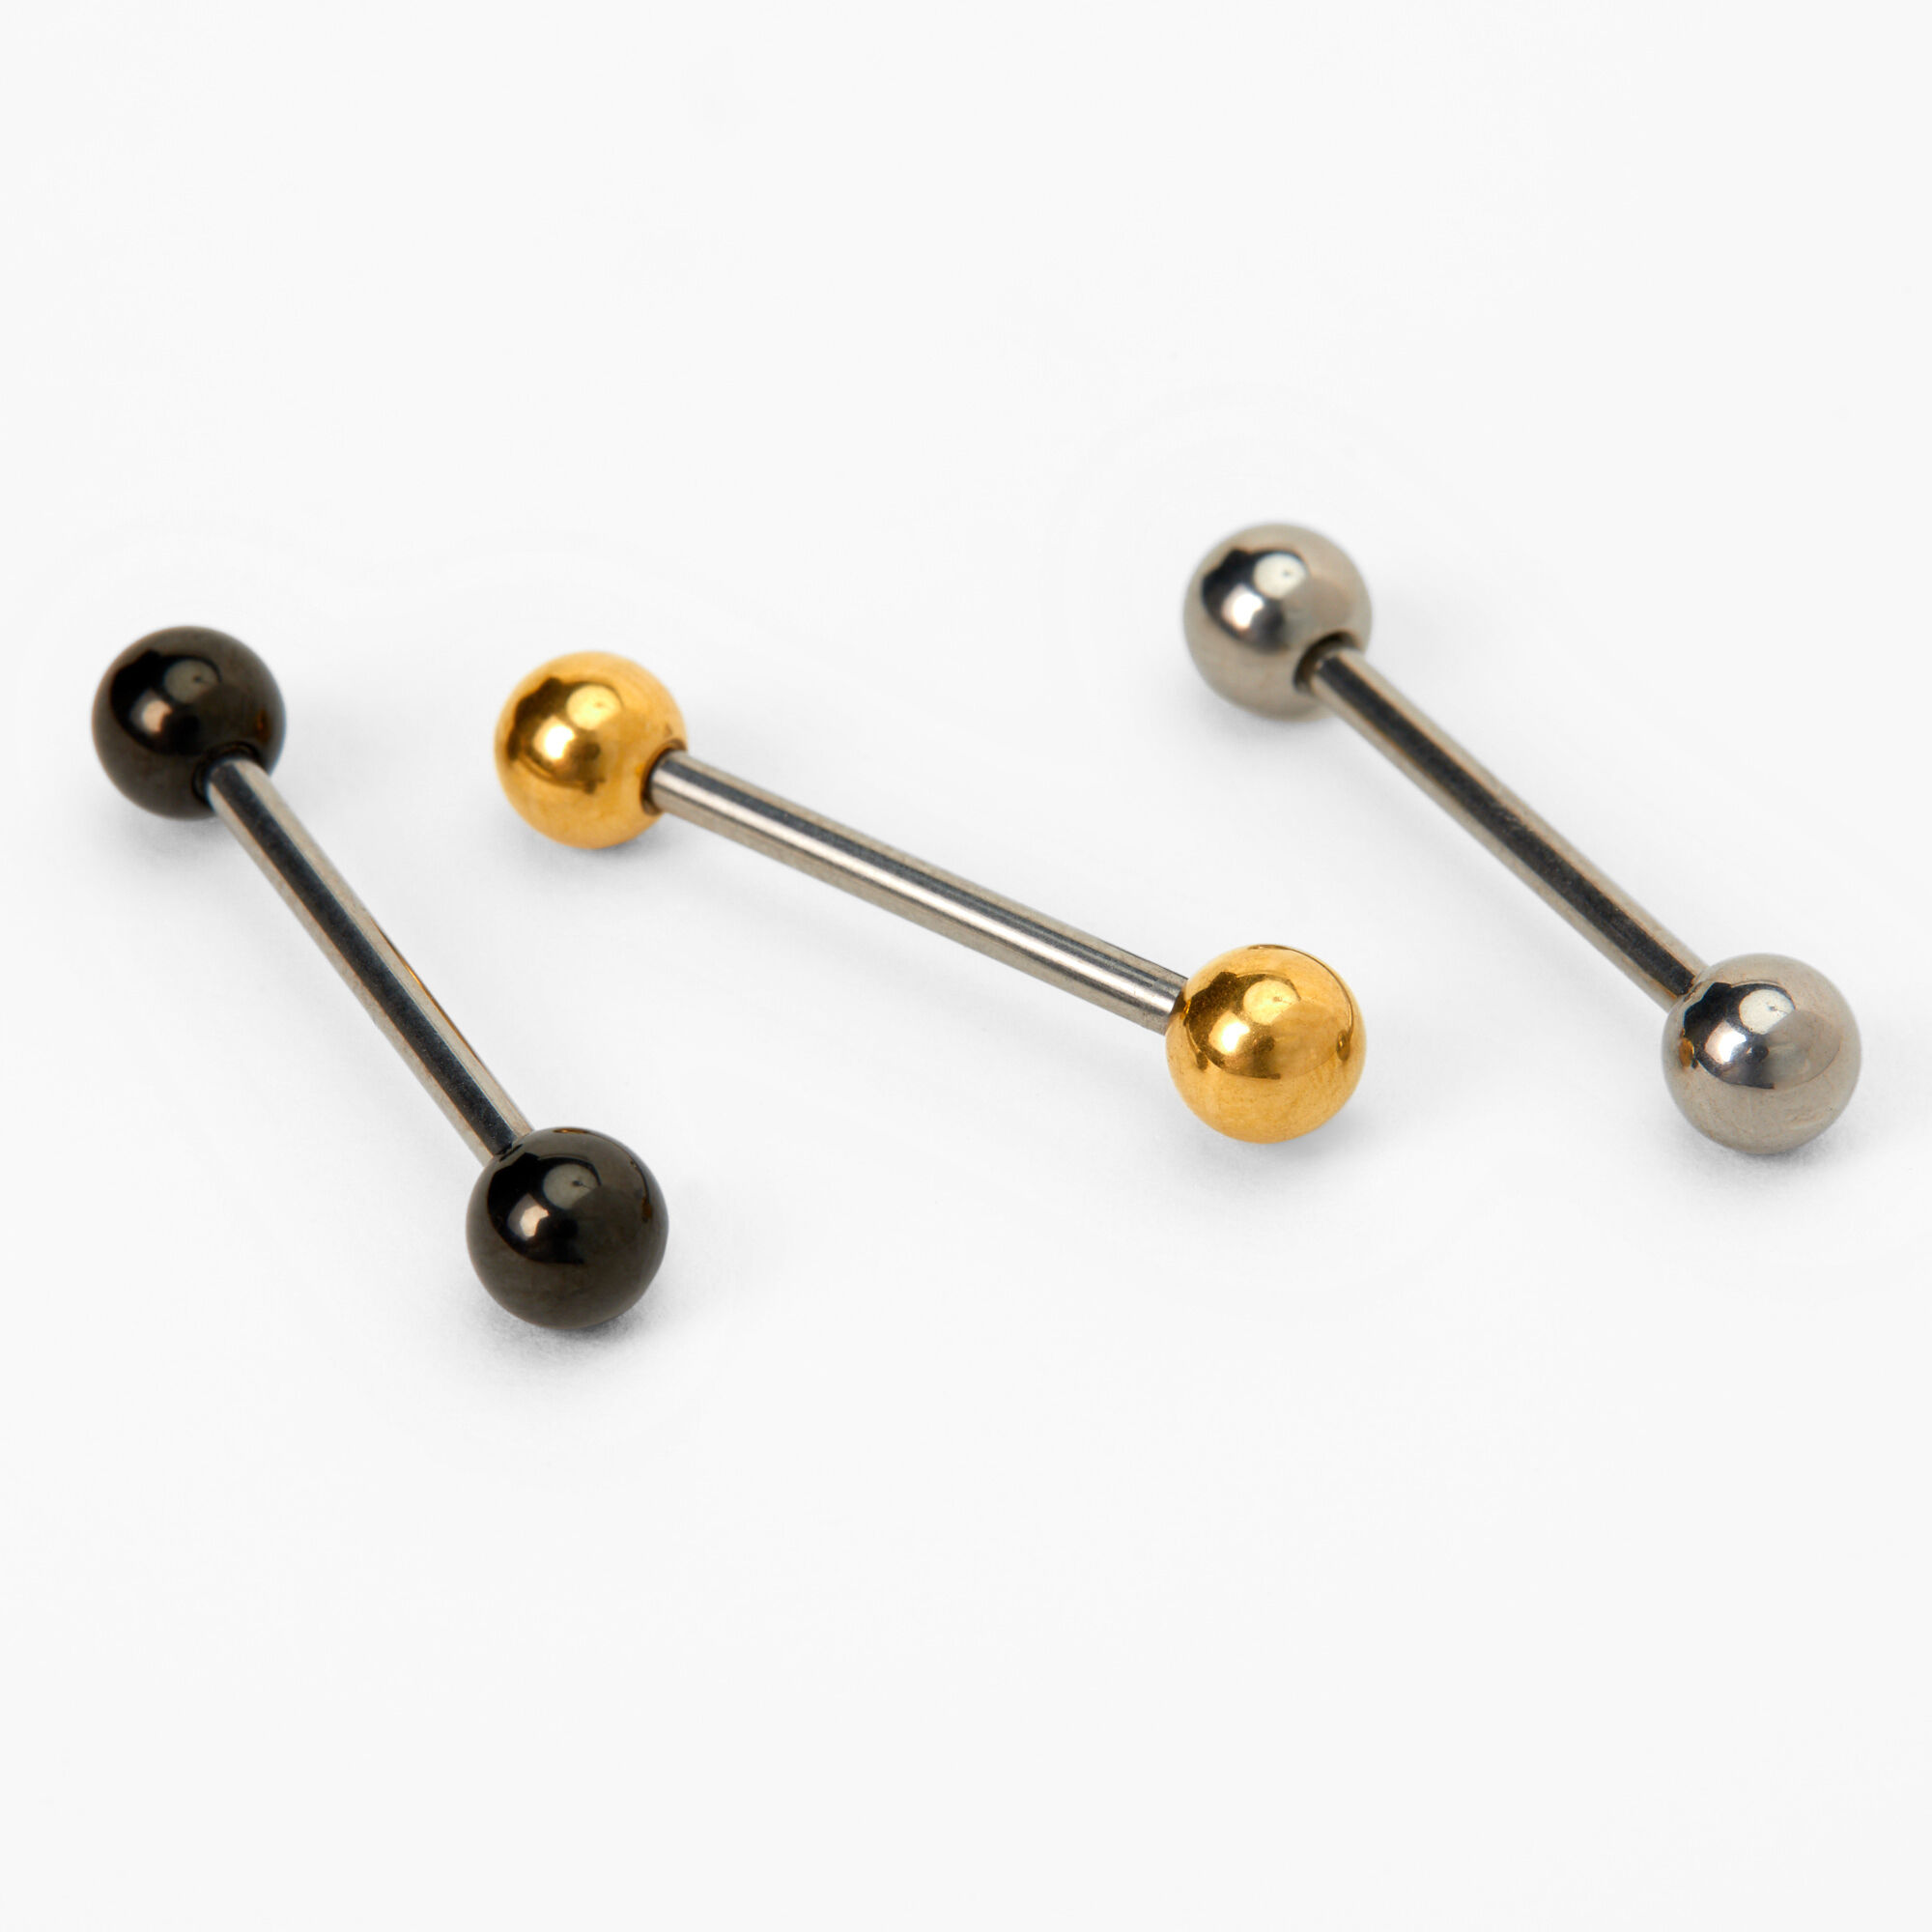 View Claires Mixed Metal 14G Tongue Rings 3 Pack Gold information